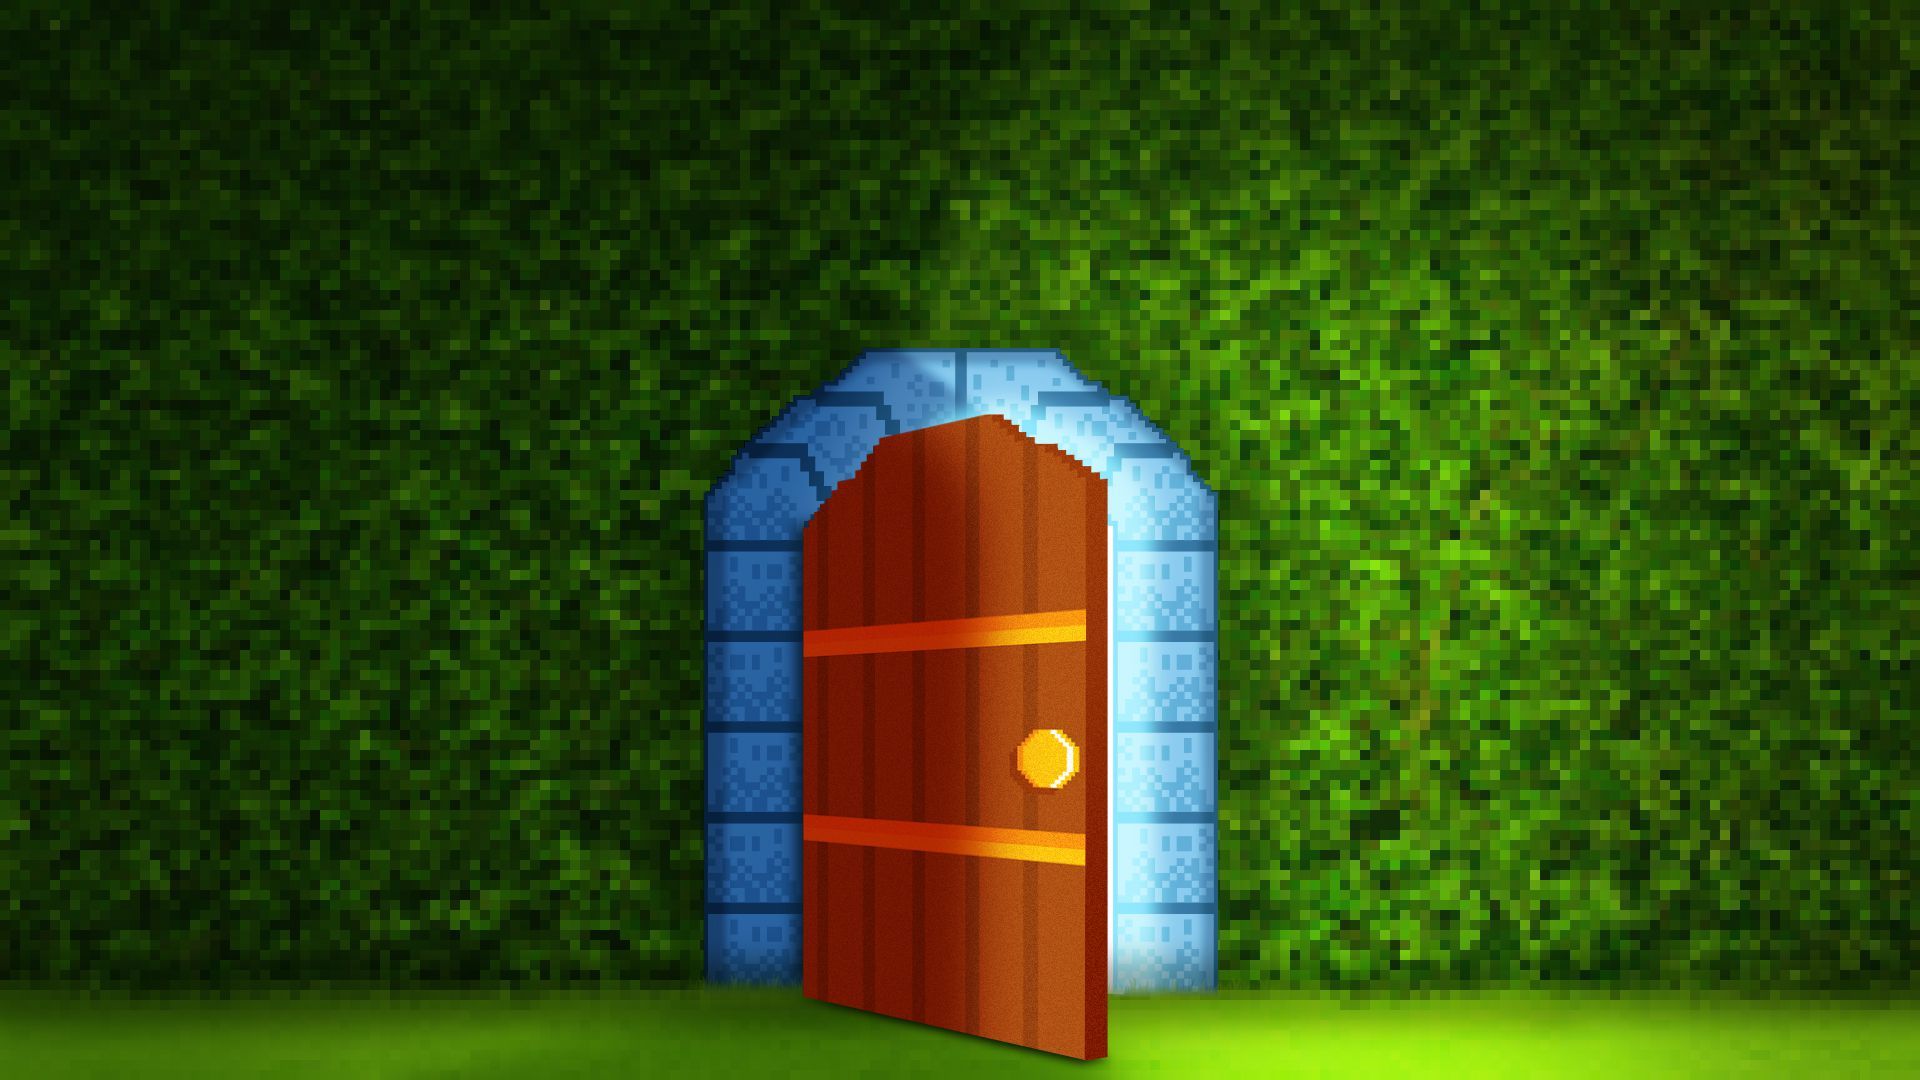 Illustrated of a pixelated hedge with an open digital door 